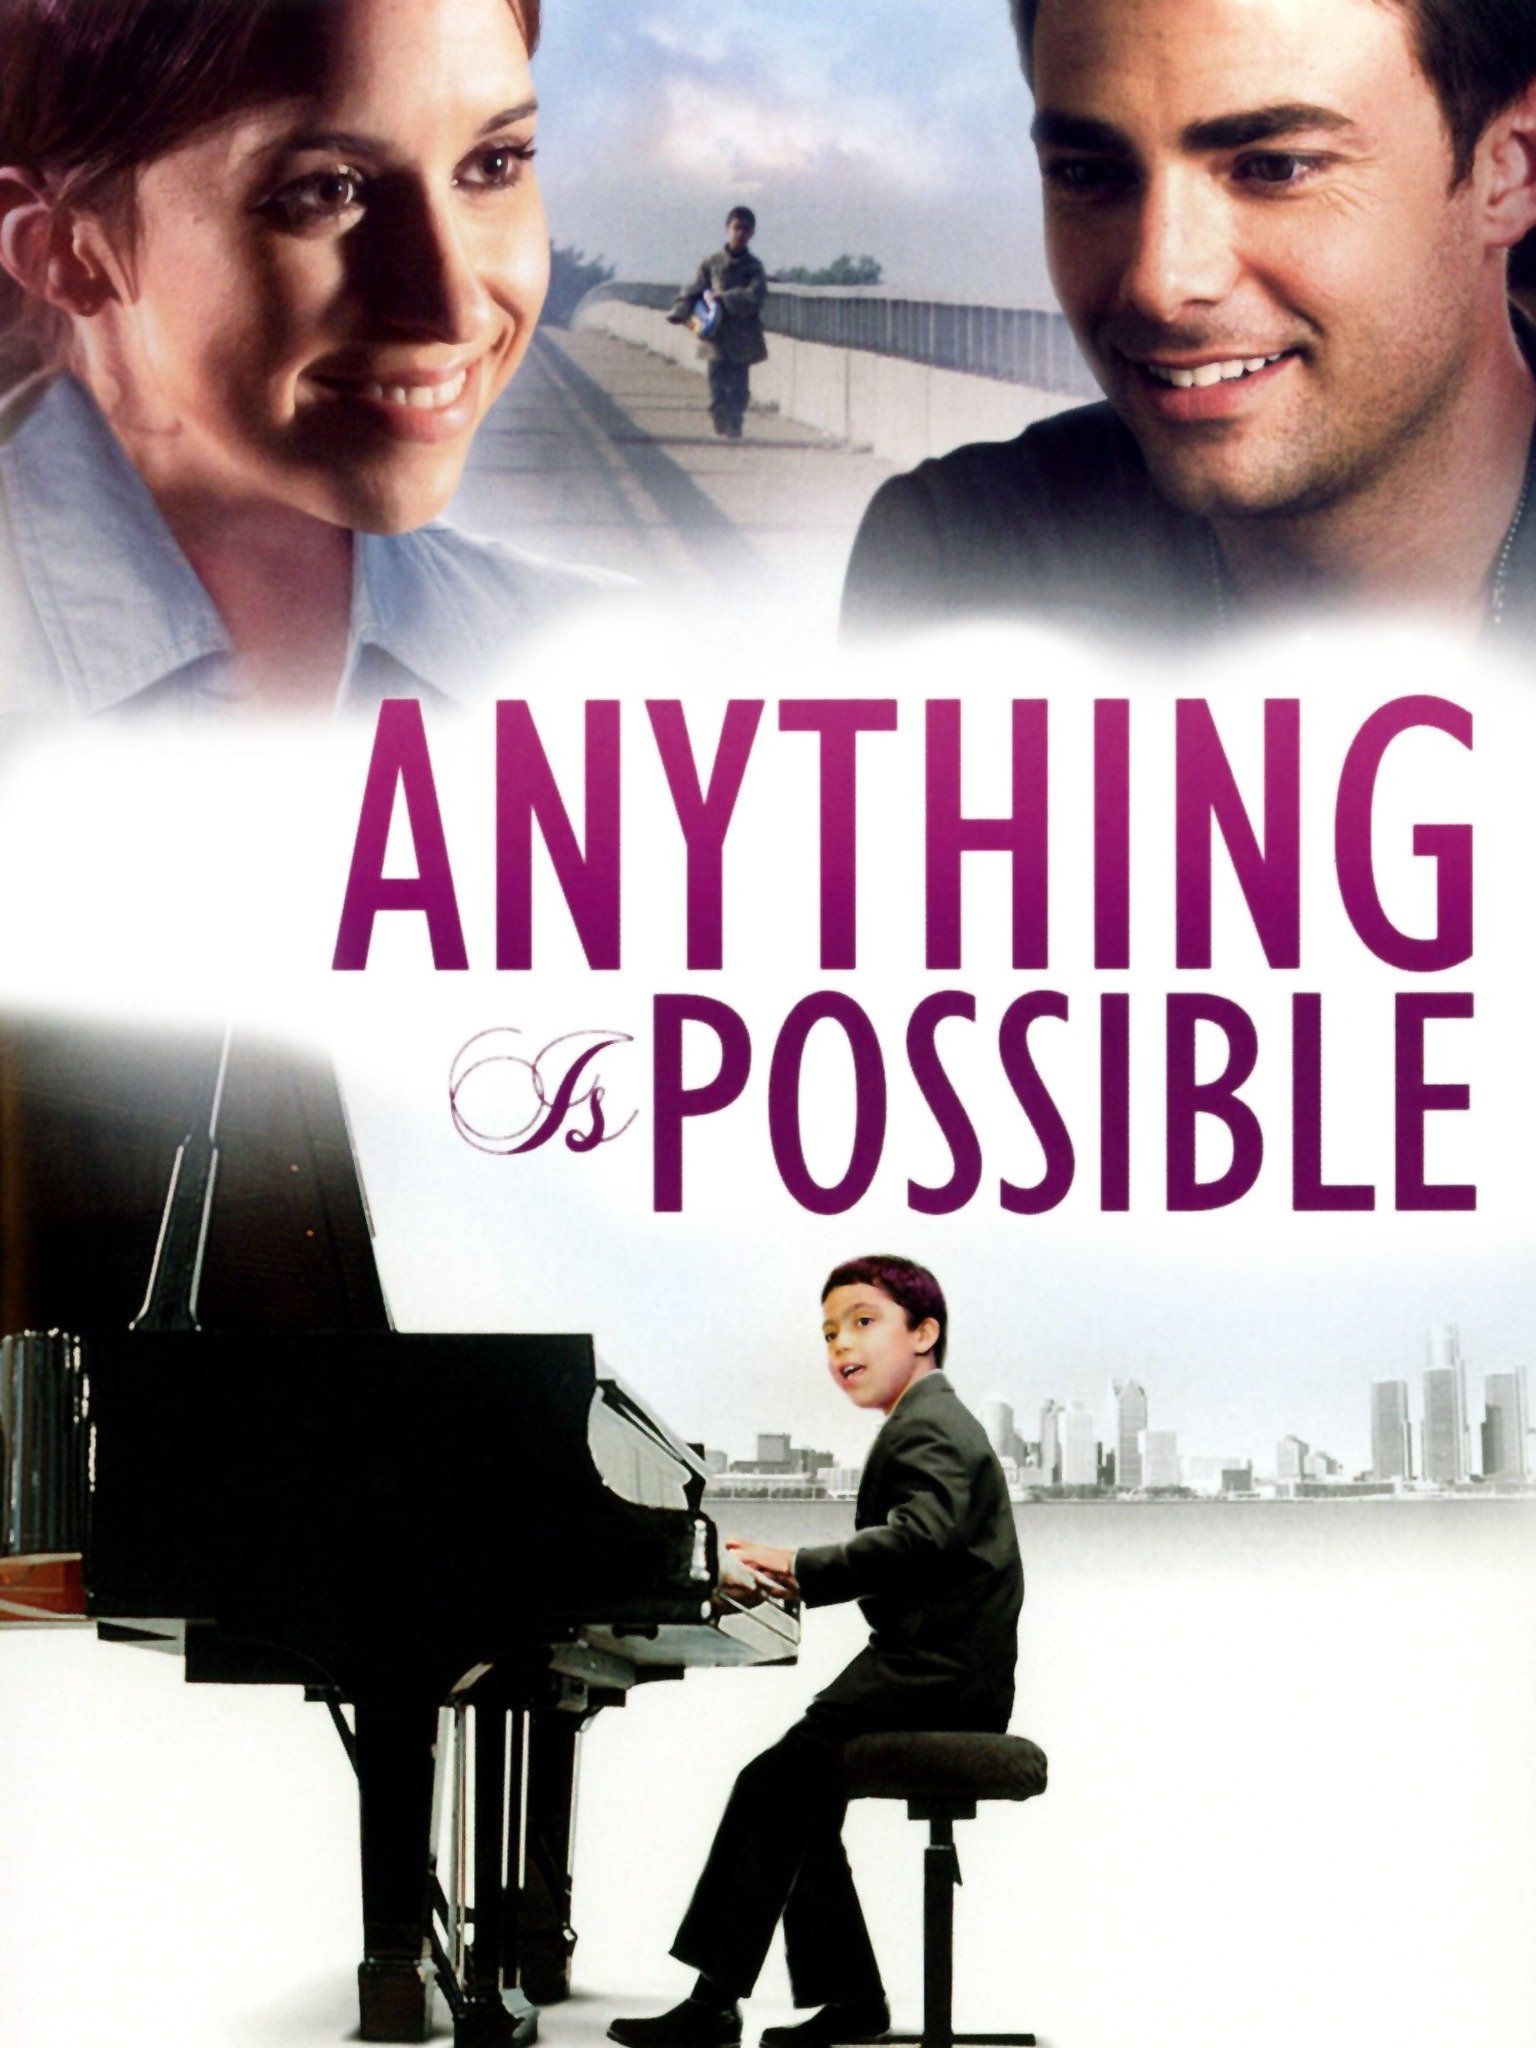 Anything Is Possible - Movie Reviews